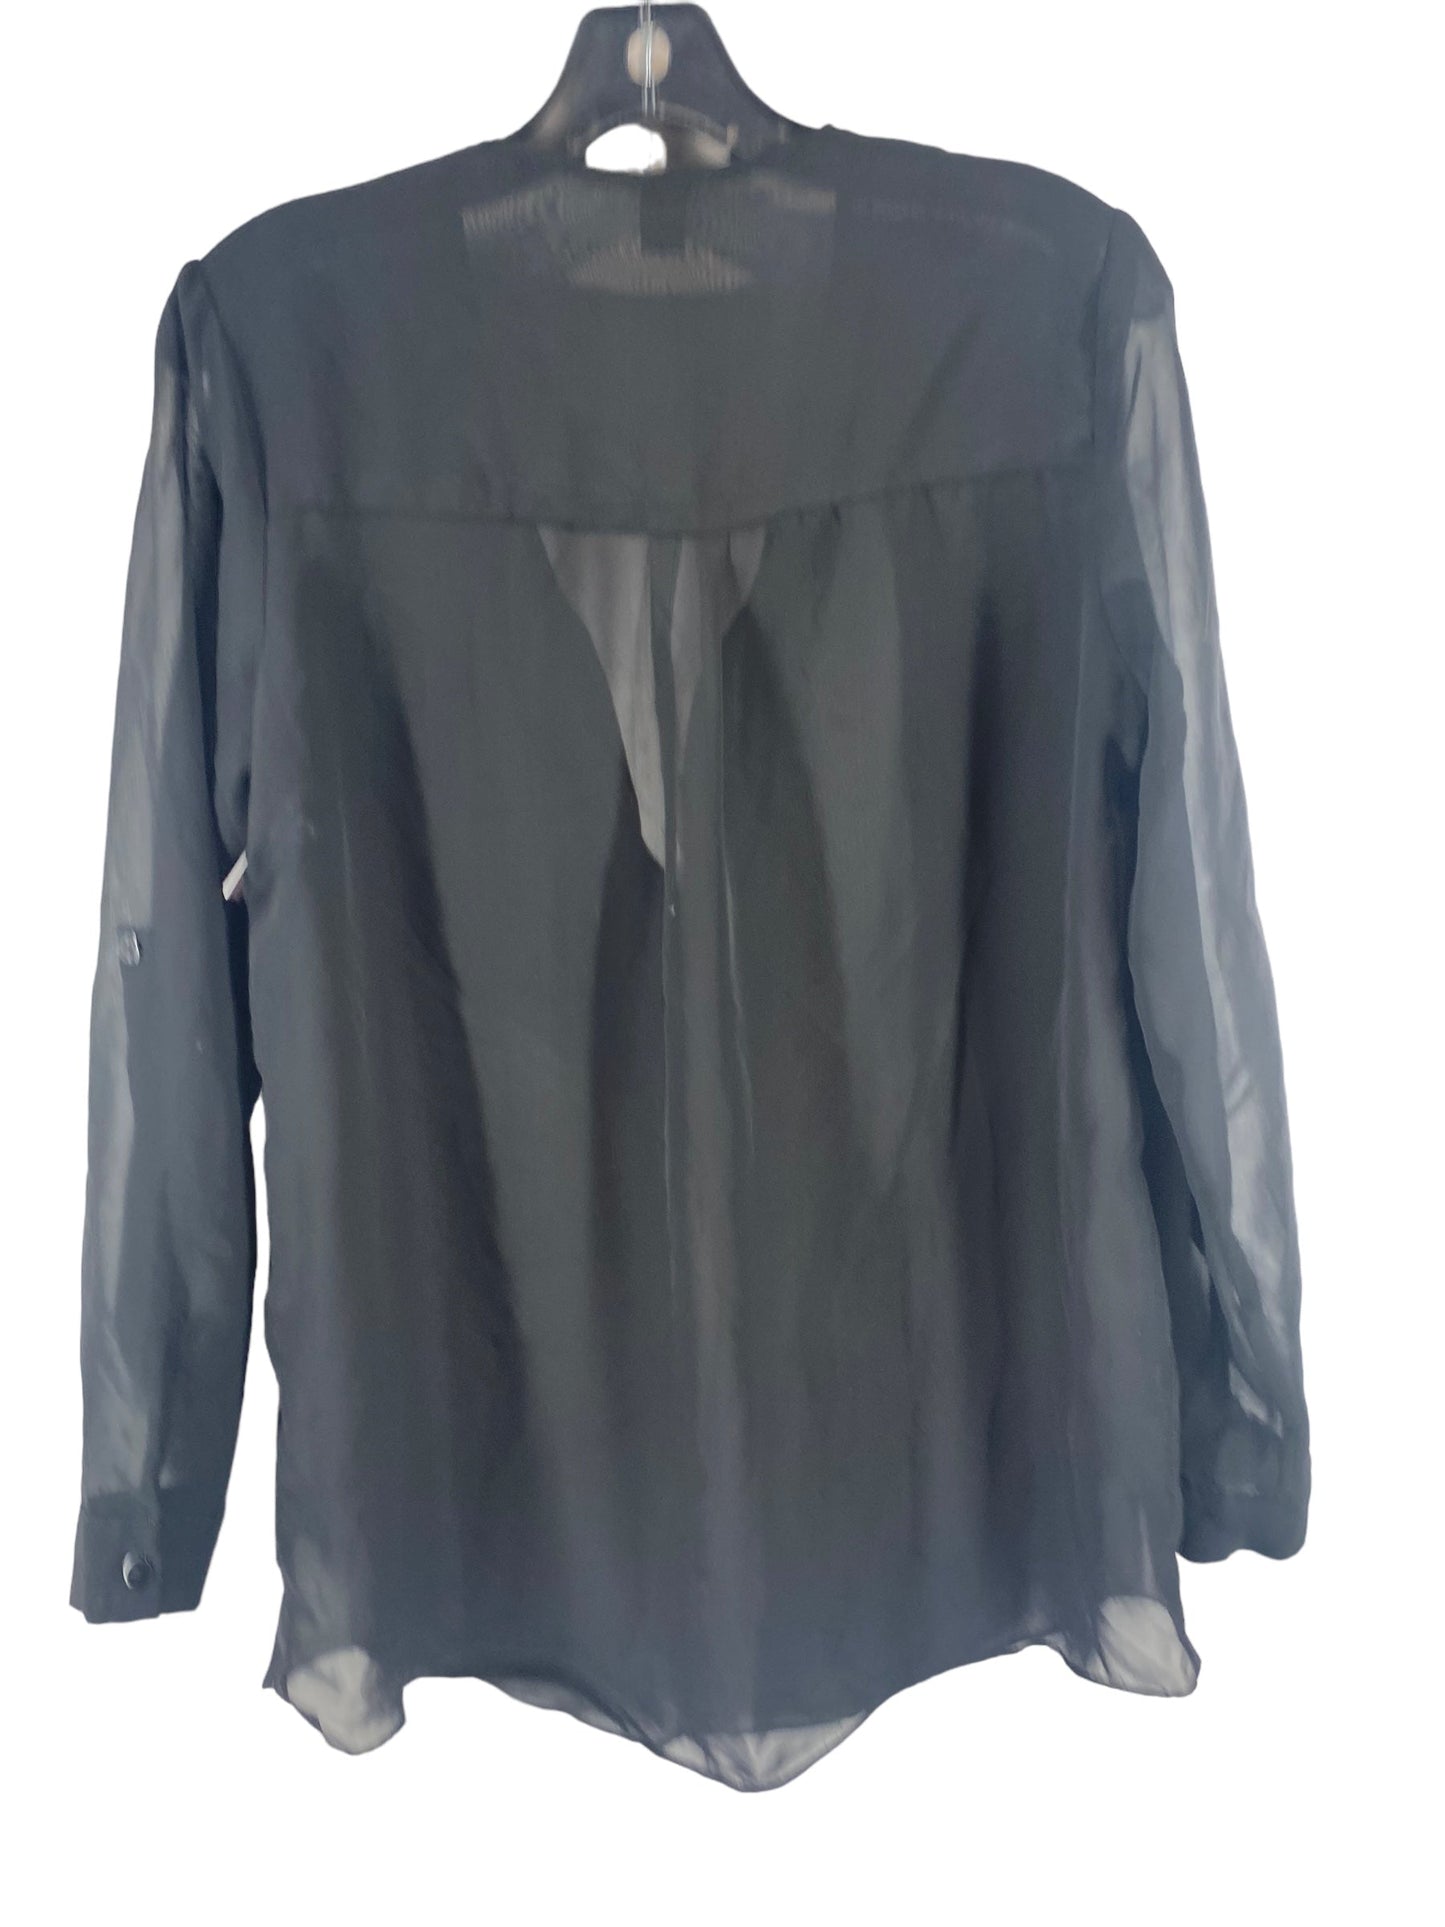 Blouse Long Sleeve By Top Shop  Size: 8